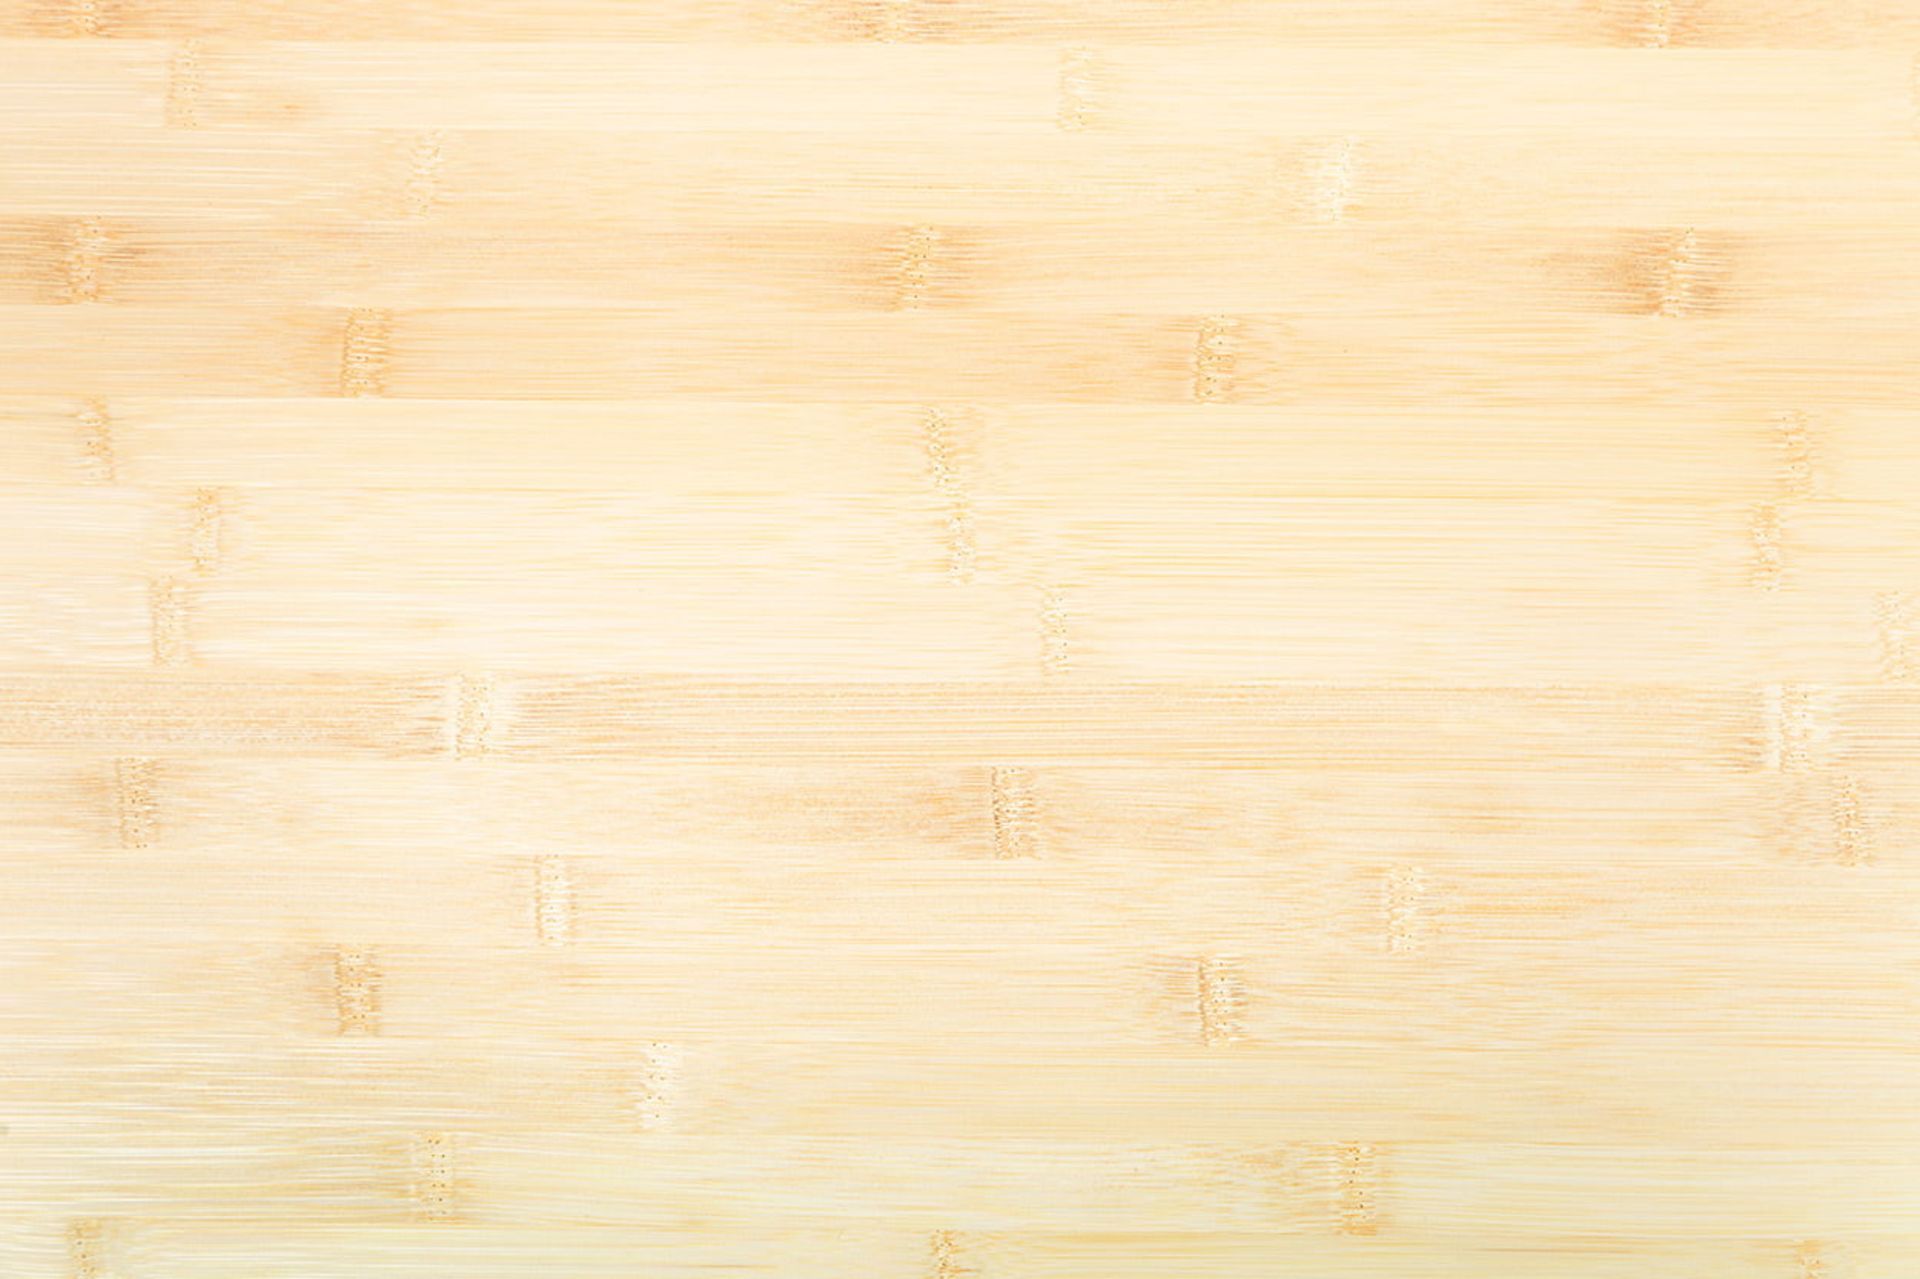 1 x Solid Bamboo Wood 4m Kitchen Worktop - Size: 4000 x 650 x 40mm - New and Sealed - RRP £400 - Image 6 of 8